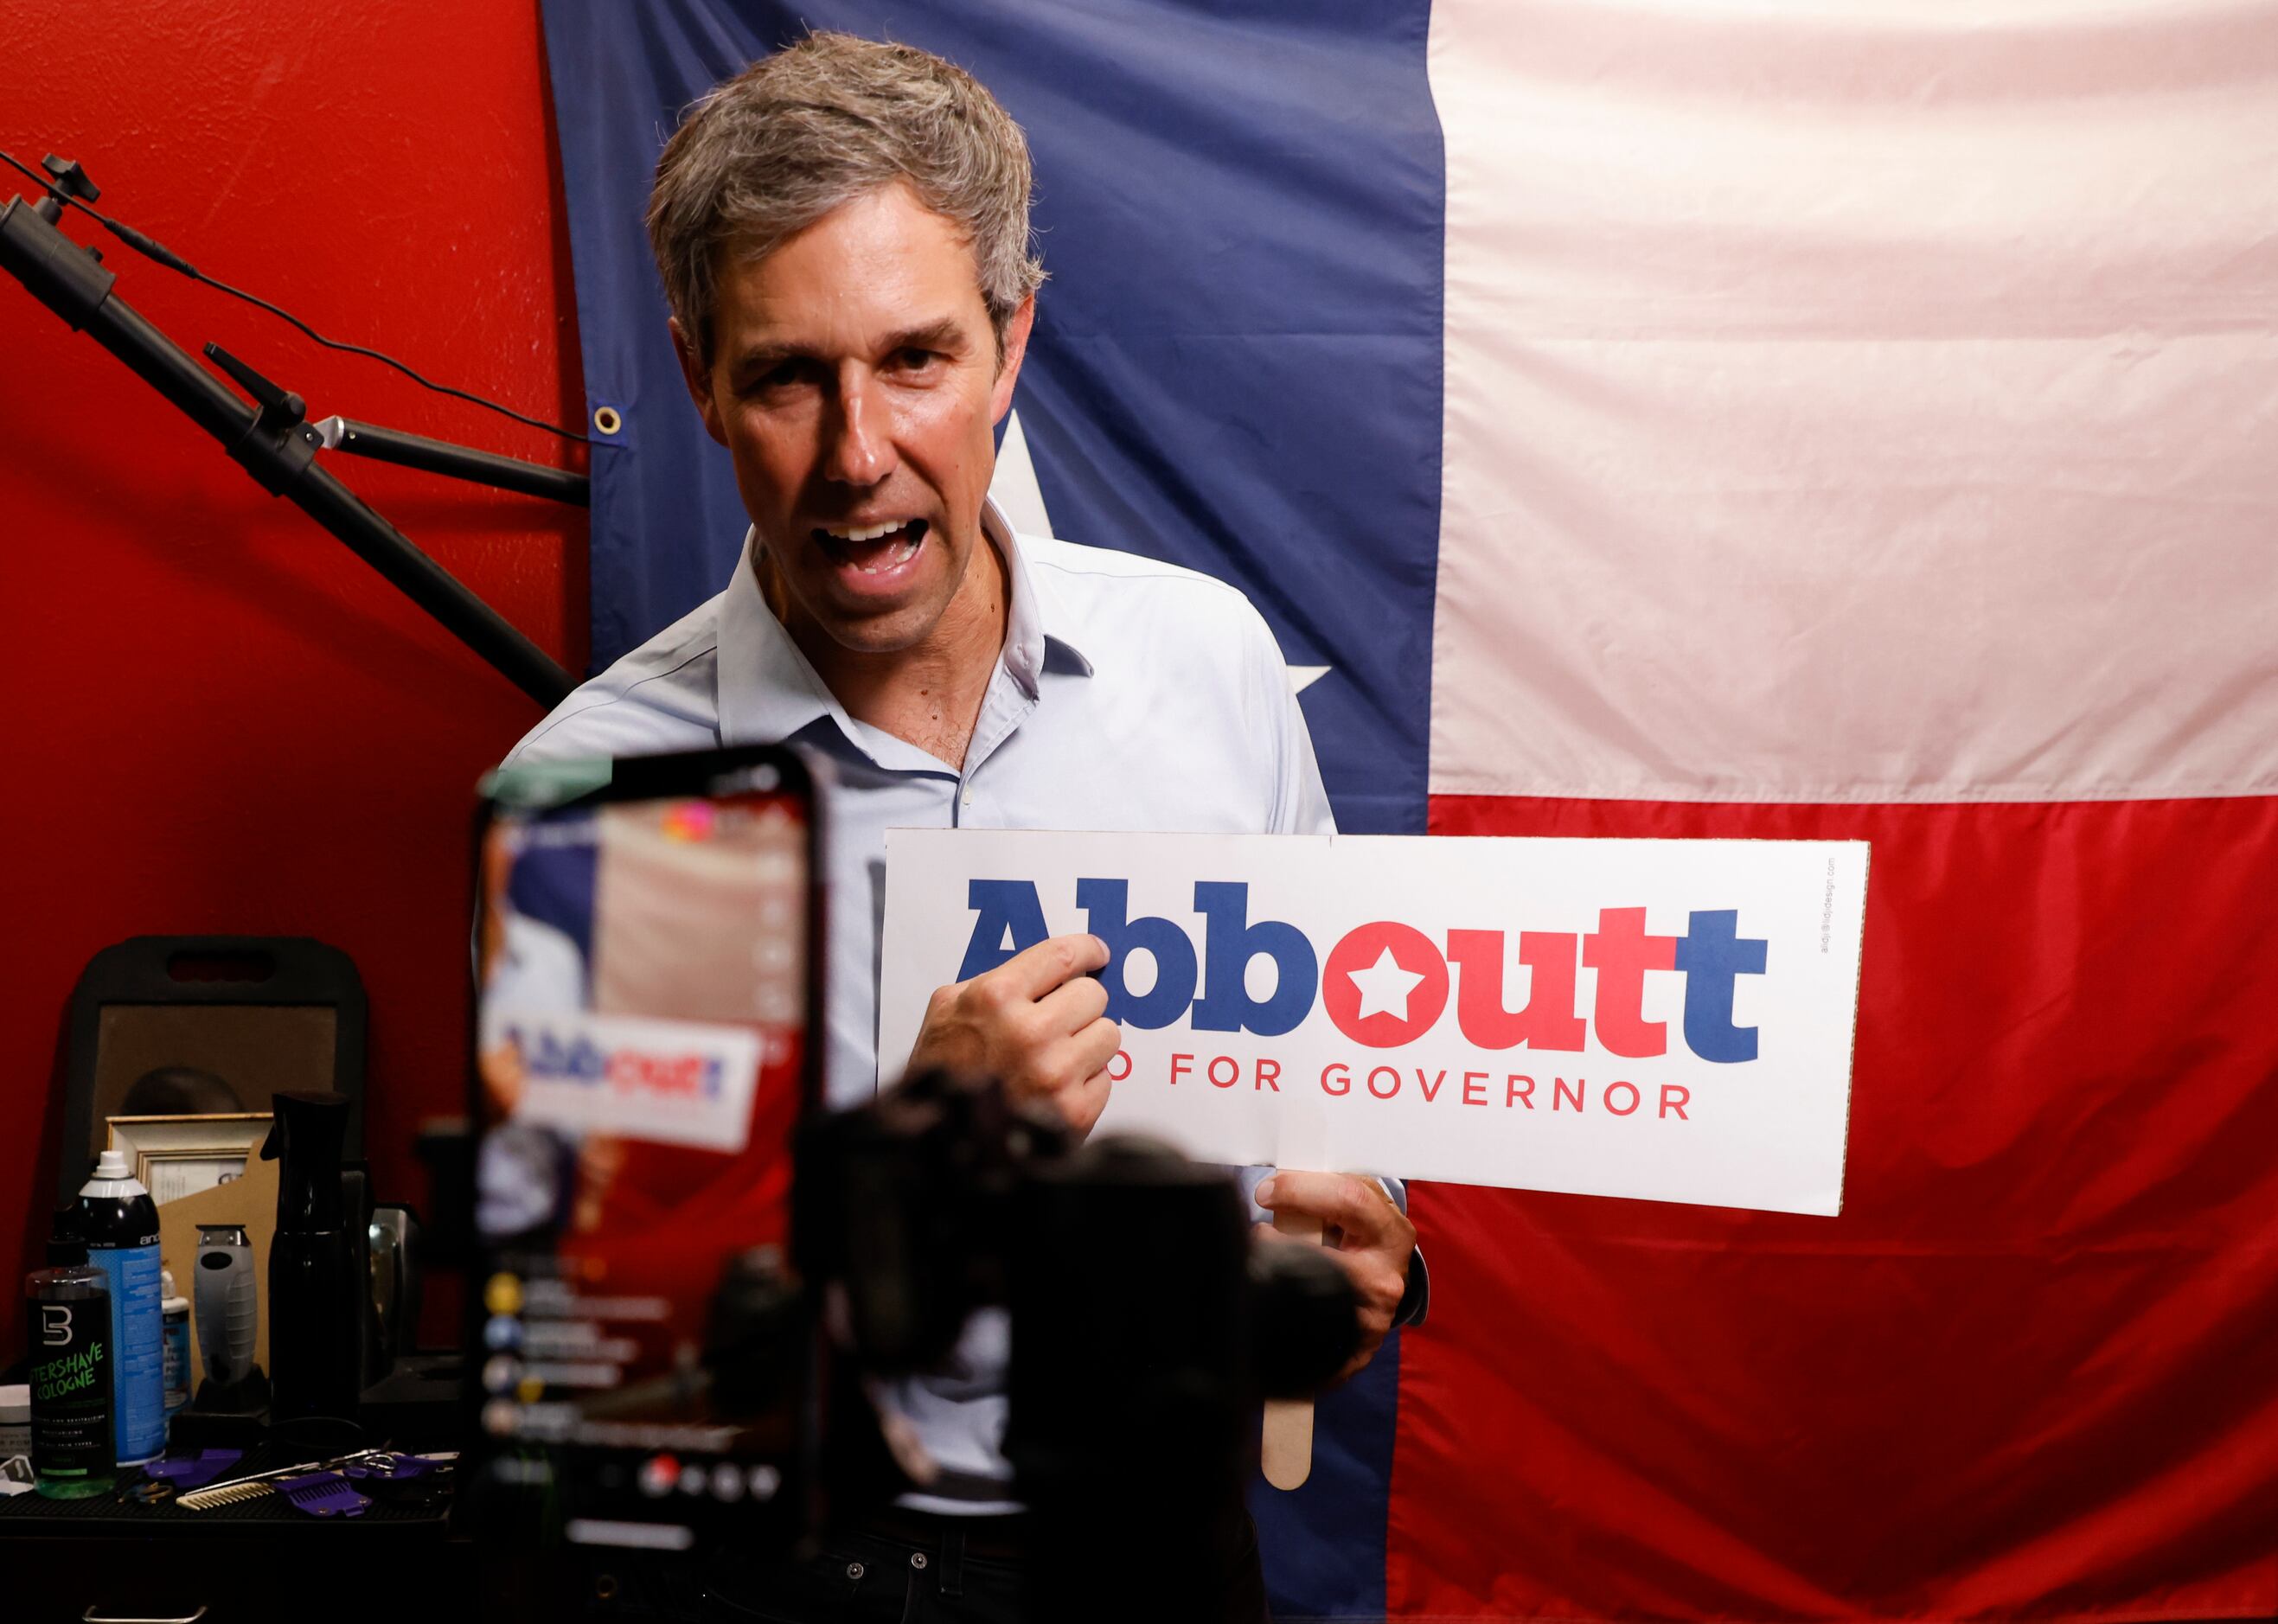 Texas Governor candidate Beto O'Rourke holds a sign reading “Abboutt,” intended towards...